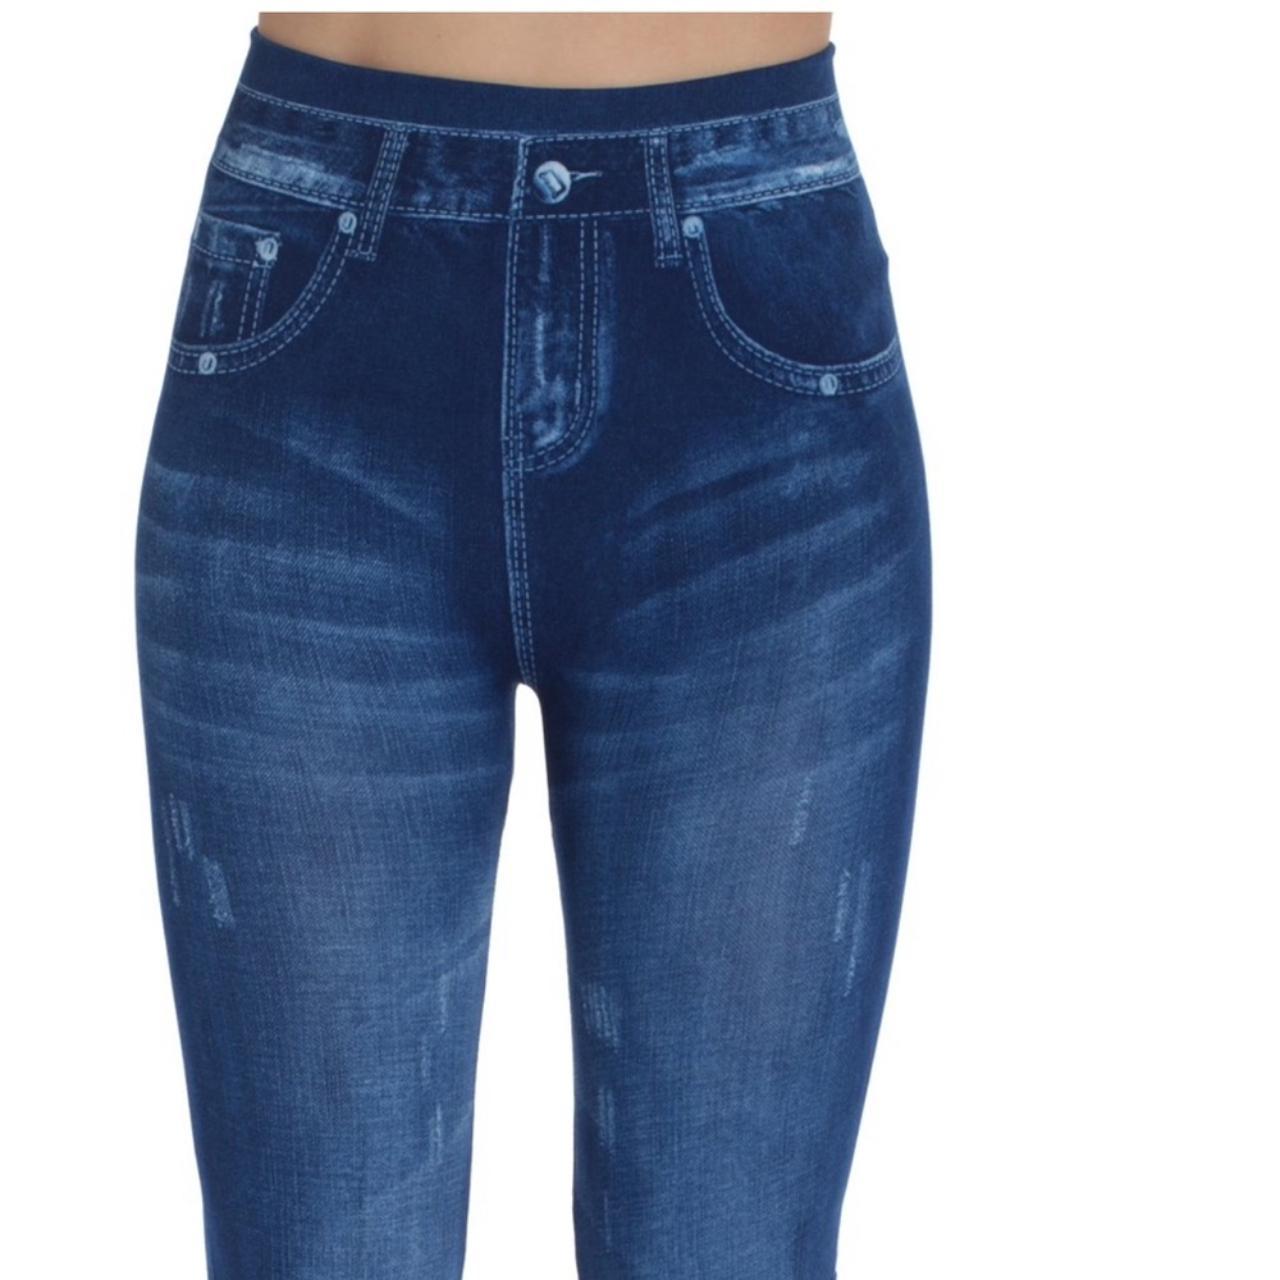 Product Image 3 - Miss juli s/m
Love that jeans